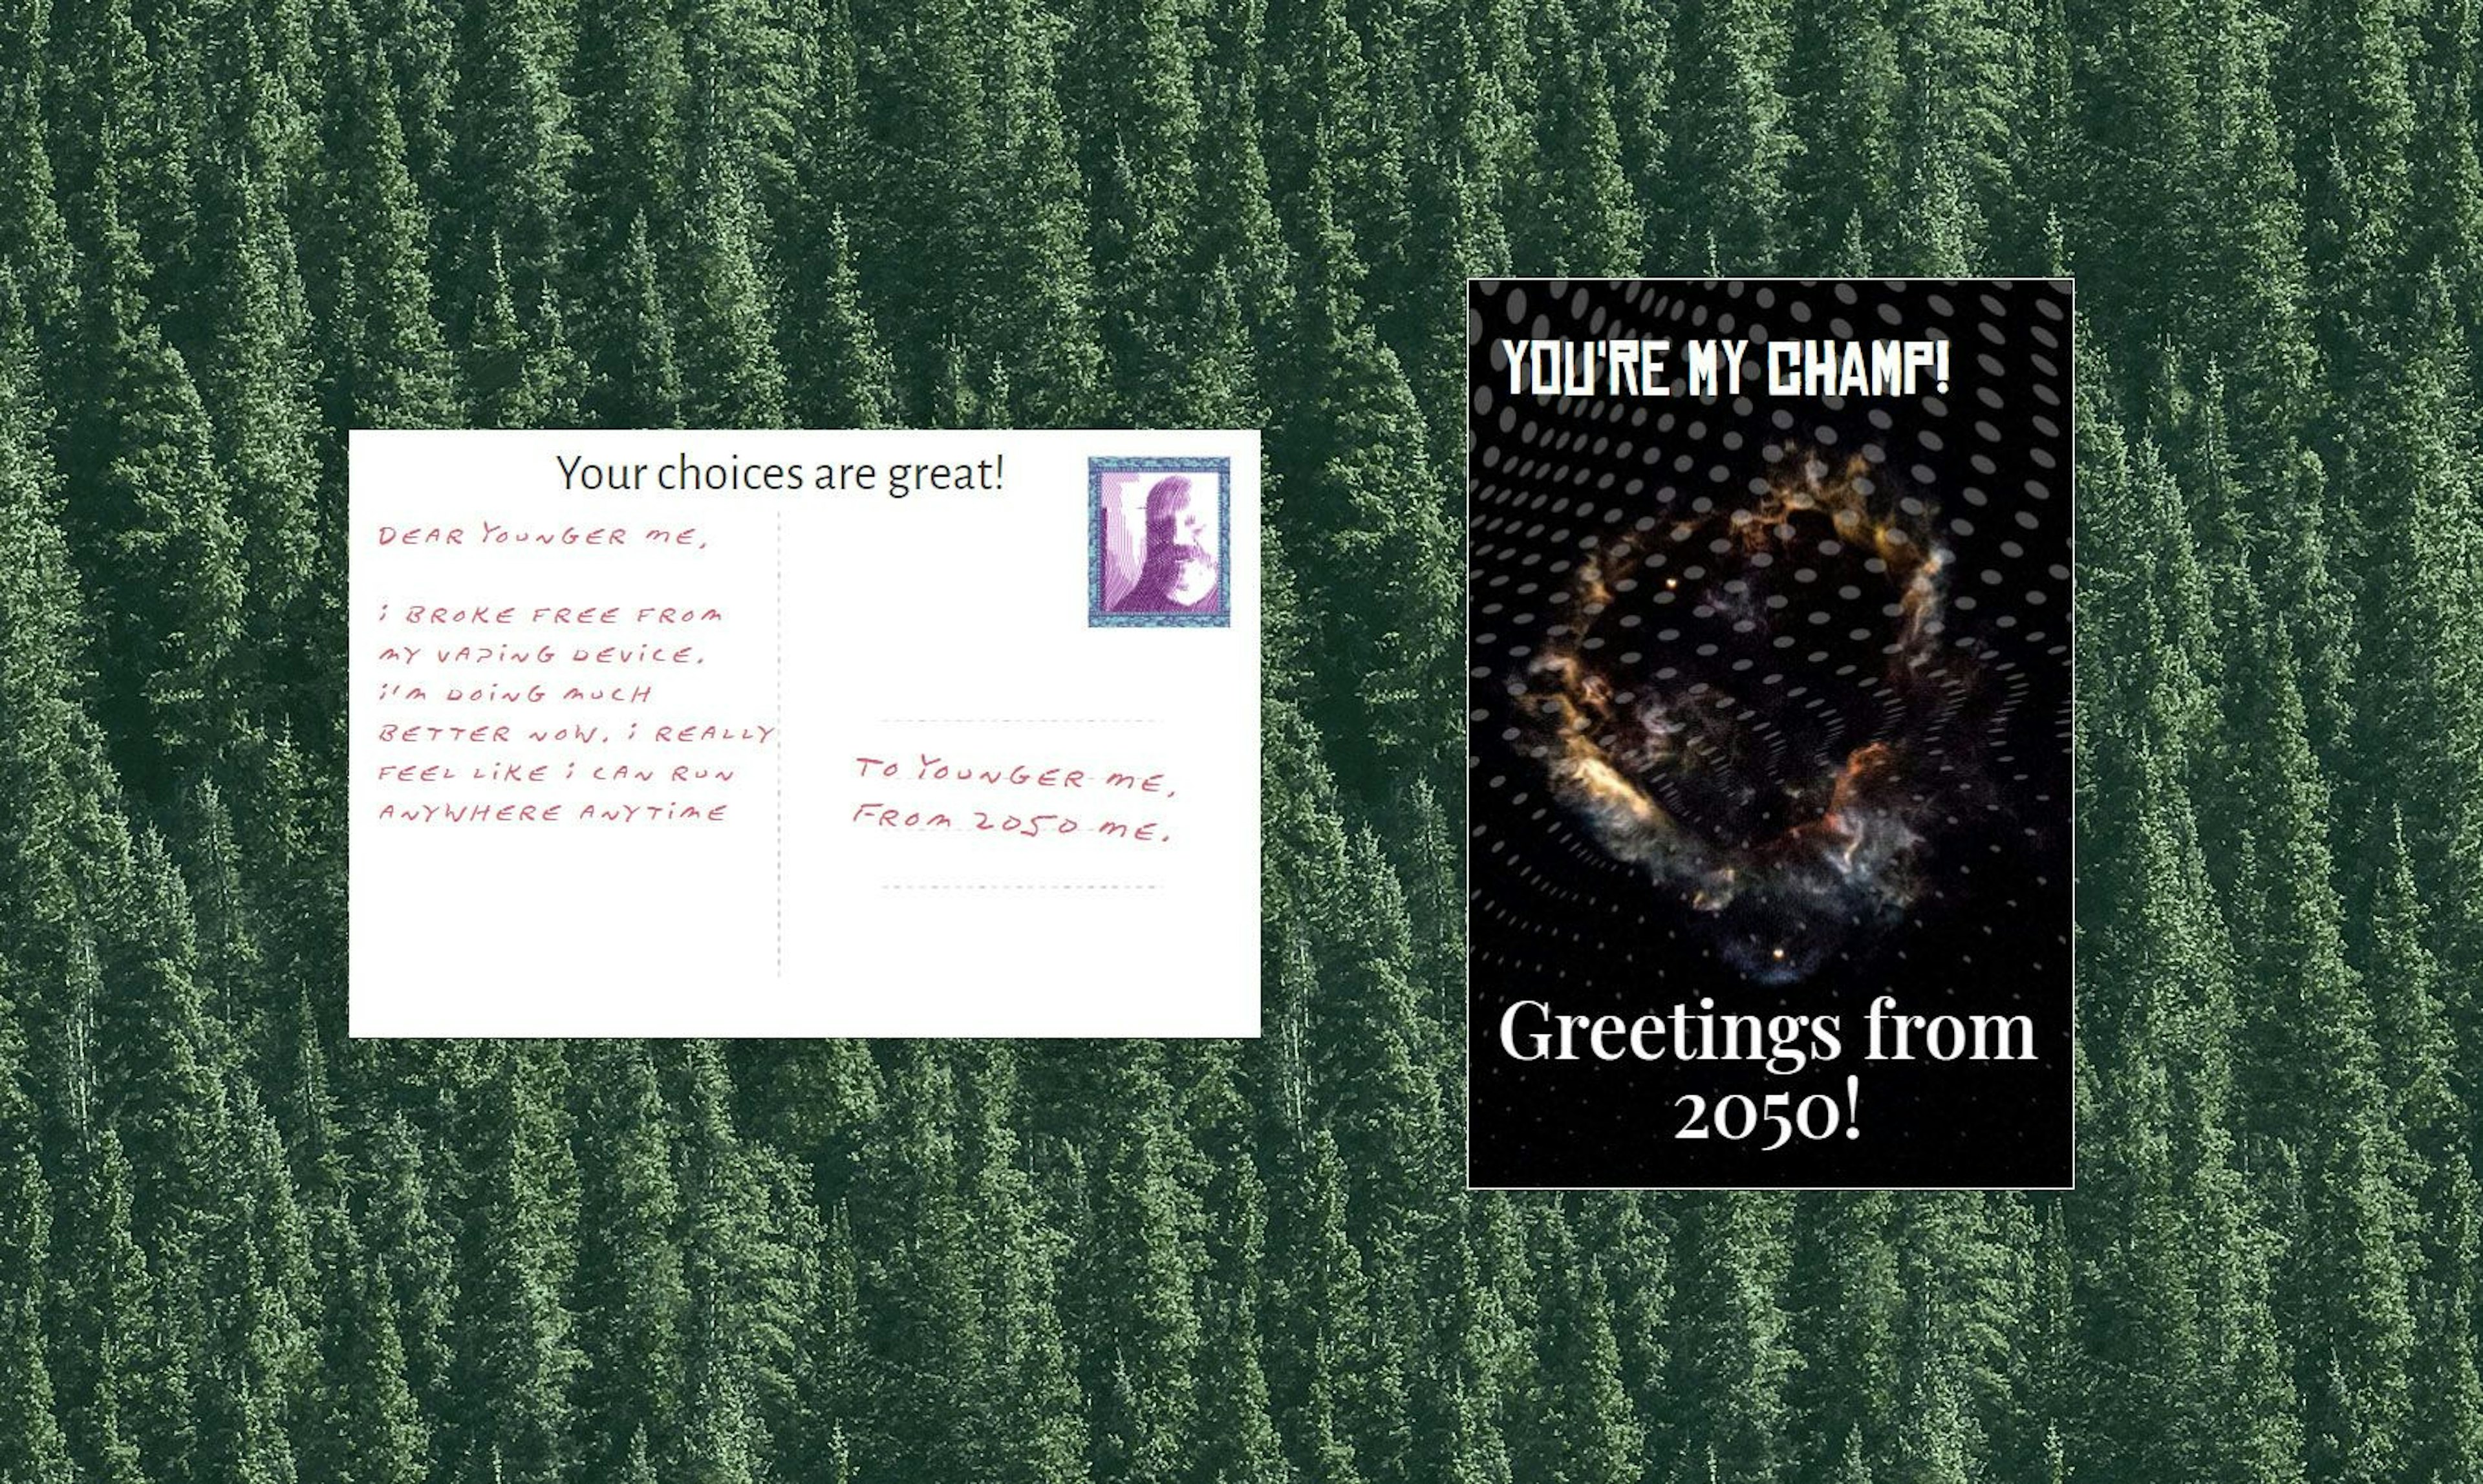 A postcard front and back are displayed on a wallpaper of evergreen trees. The postcard front reads, "You're my champ! Greetings from 2050!"